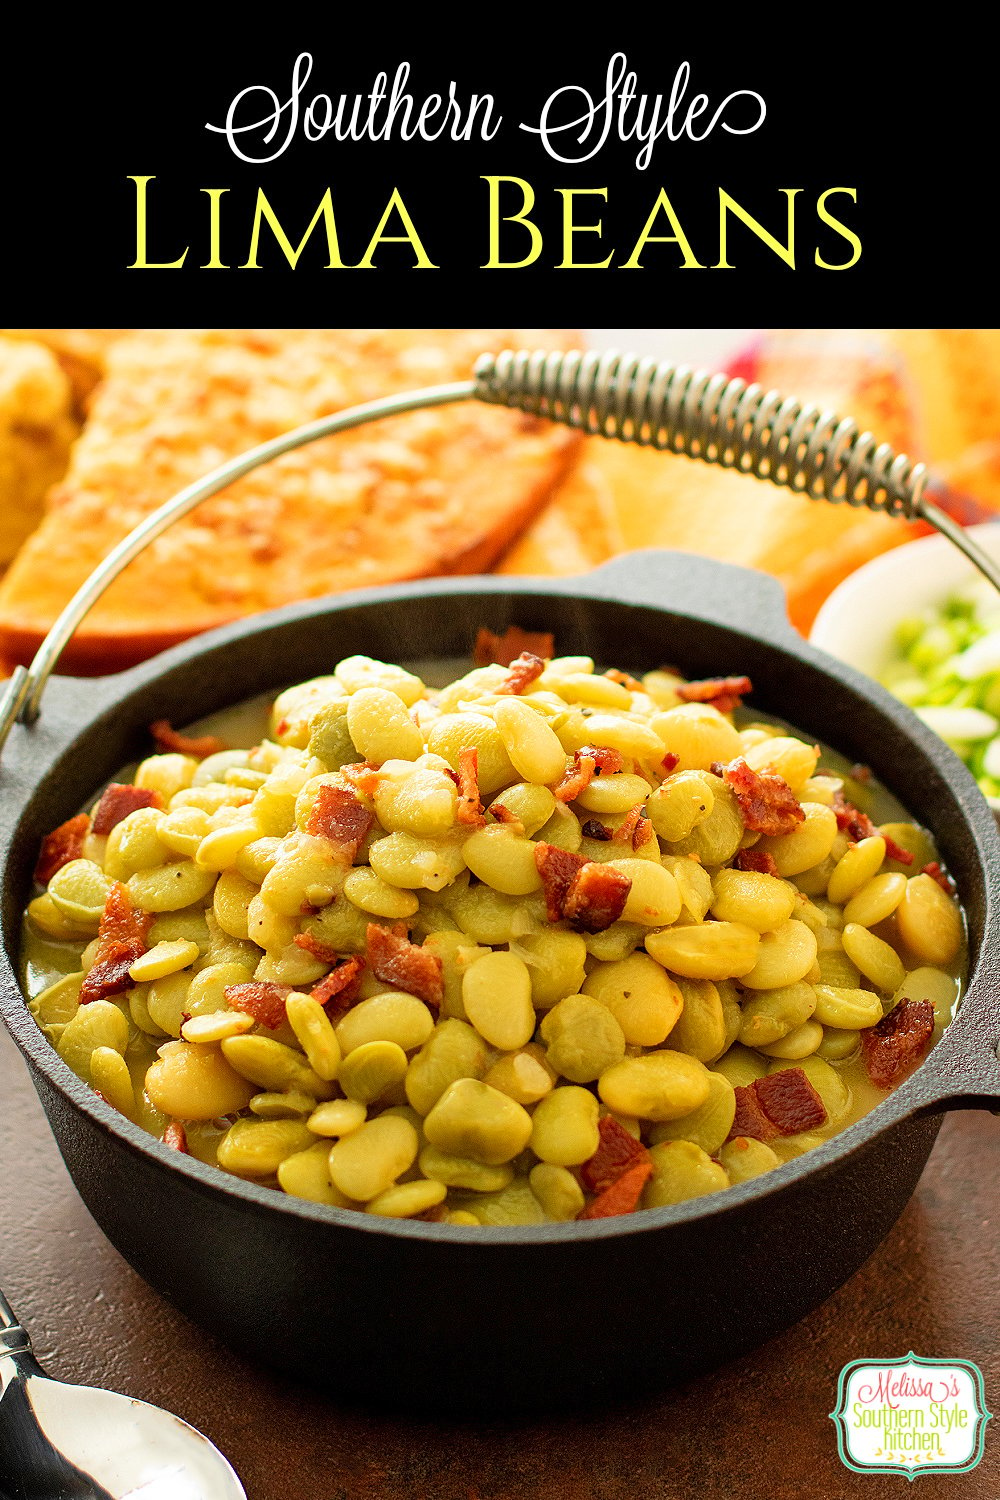 This easy Lima Beans Recipe will take you from weekday family meals to holiday gatherings #limabeans #butterbeans #howtomakelimabeans #thanksgivingsidedishes #beans #beanrecipes #babylimabeansrecipe #frozenlimabeans